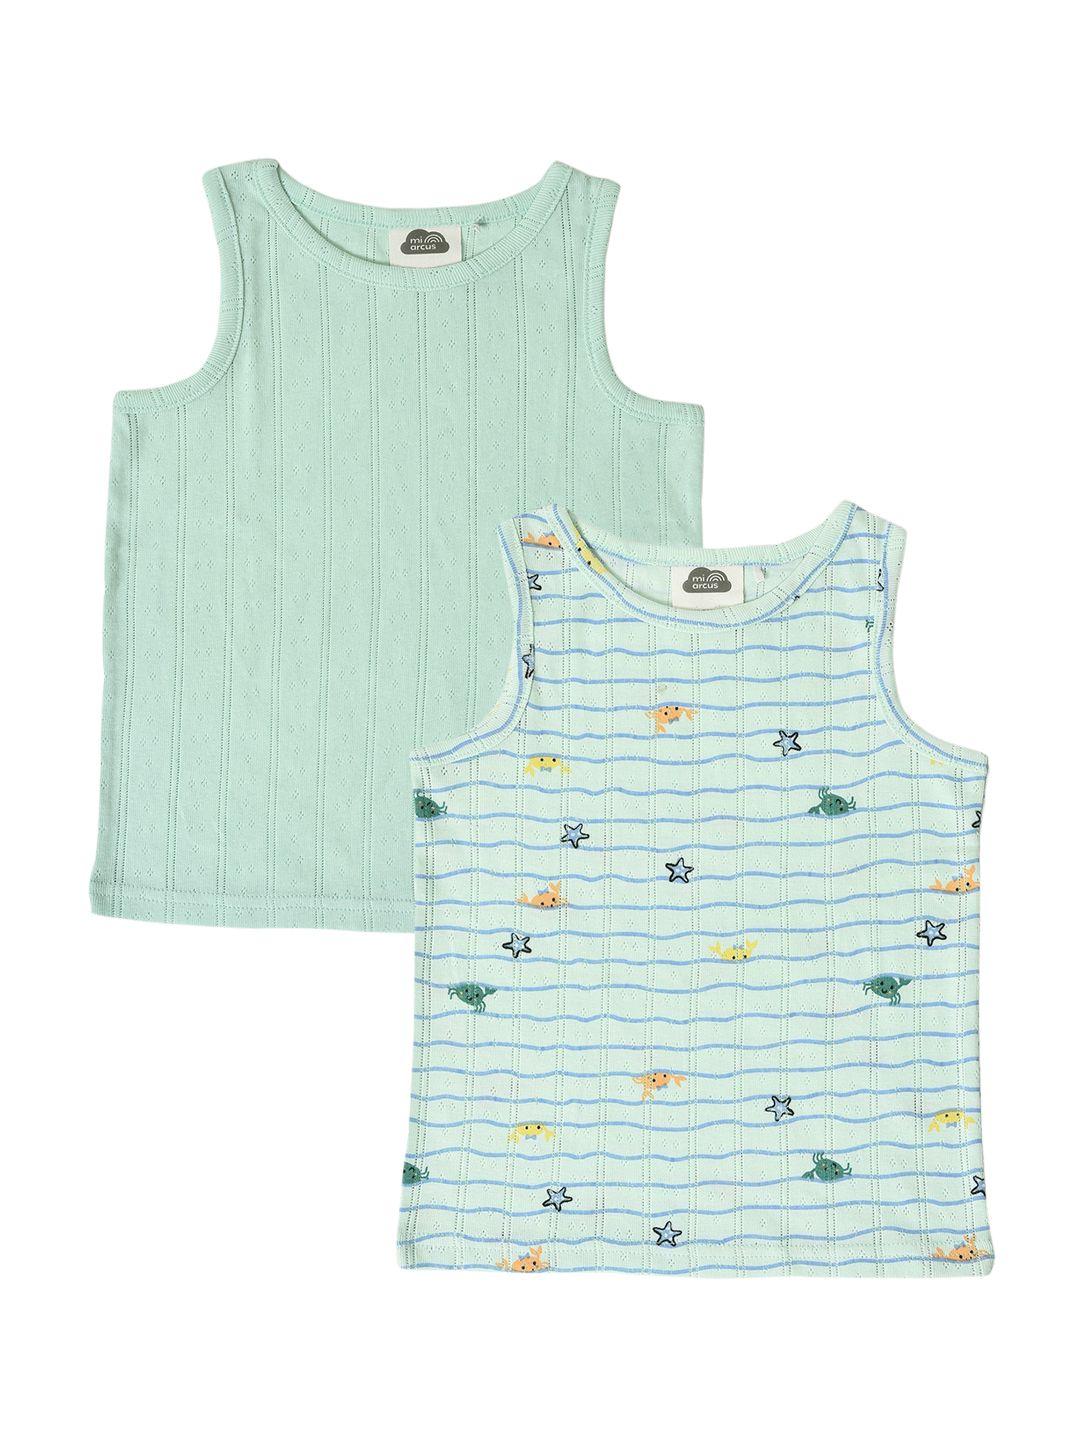 miarcus-infant-pack-of-2-sea-world-printed-cotton-innerwear-vests